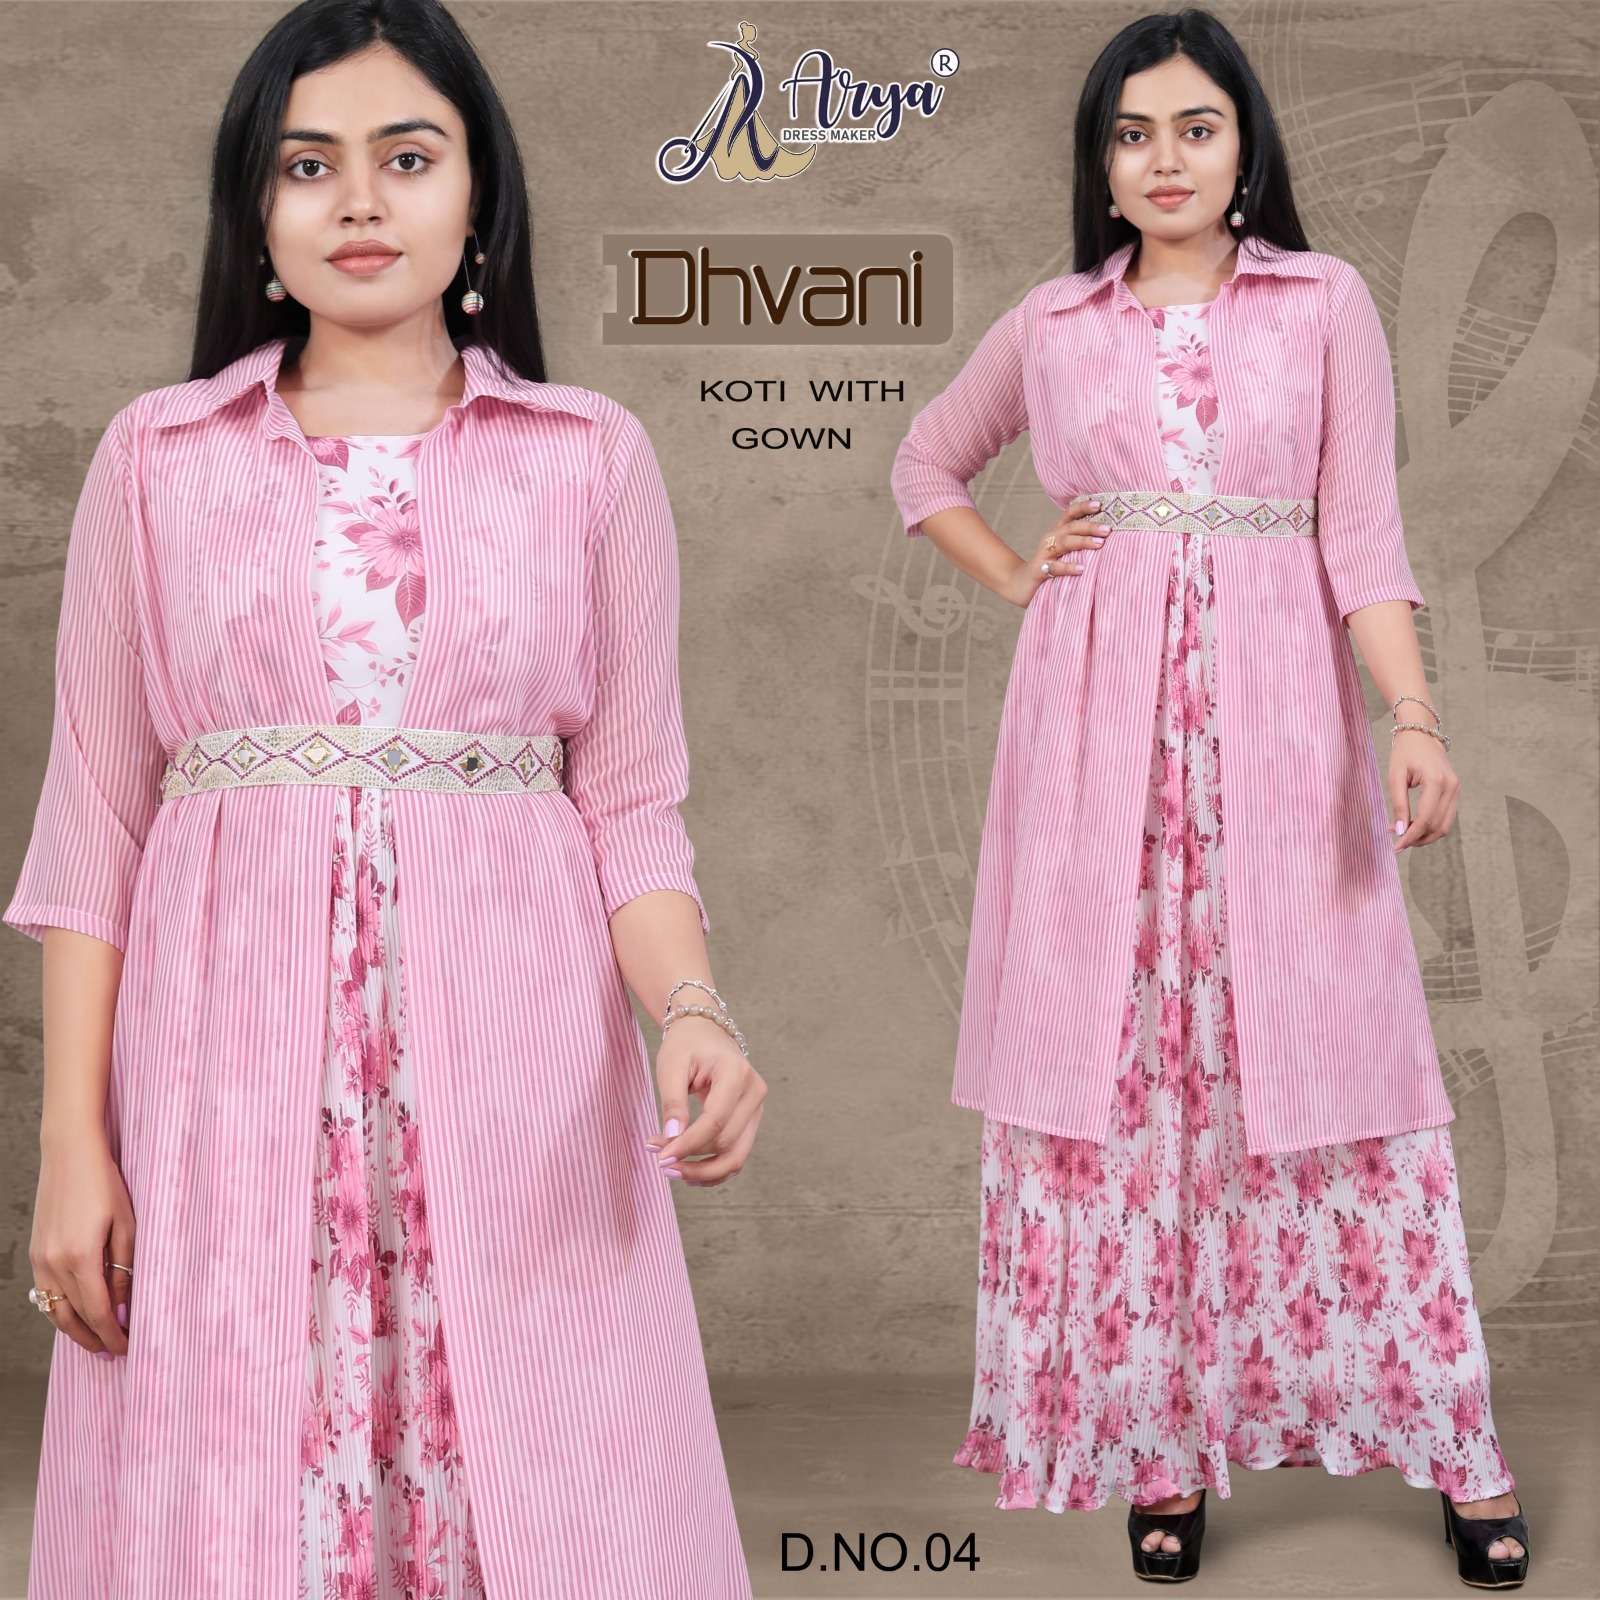 DHVANI BY ARYA DRESS MAKER DESIGNER FAUX GEORGETTE PRINT GOWNS WITH KOTI